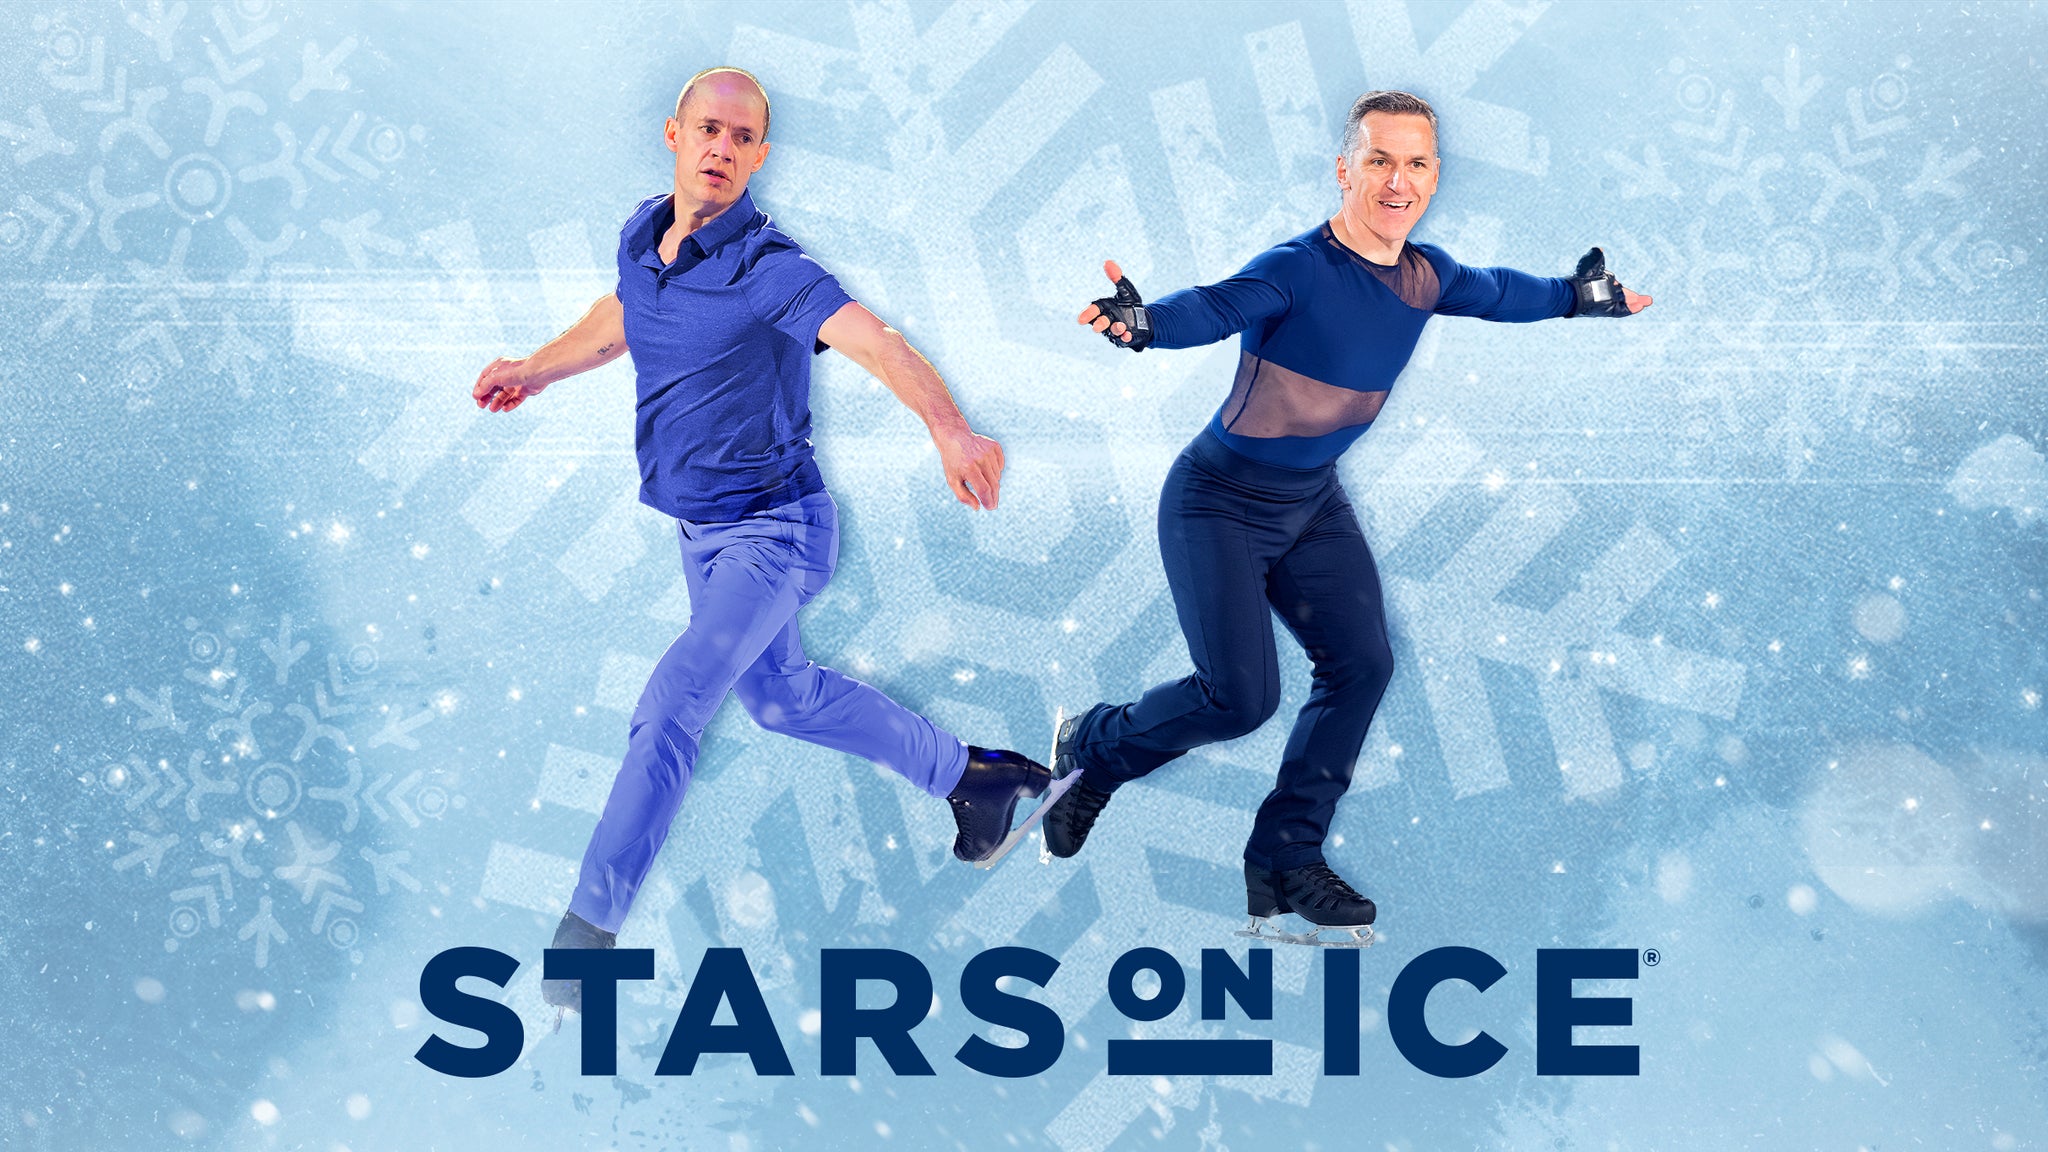 Stars on Ice Holiday Canada Tickets Event Dates & Schedule